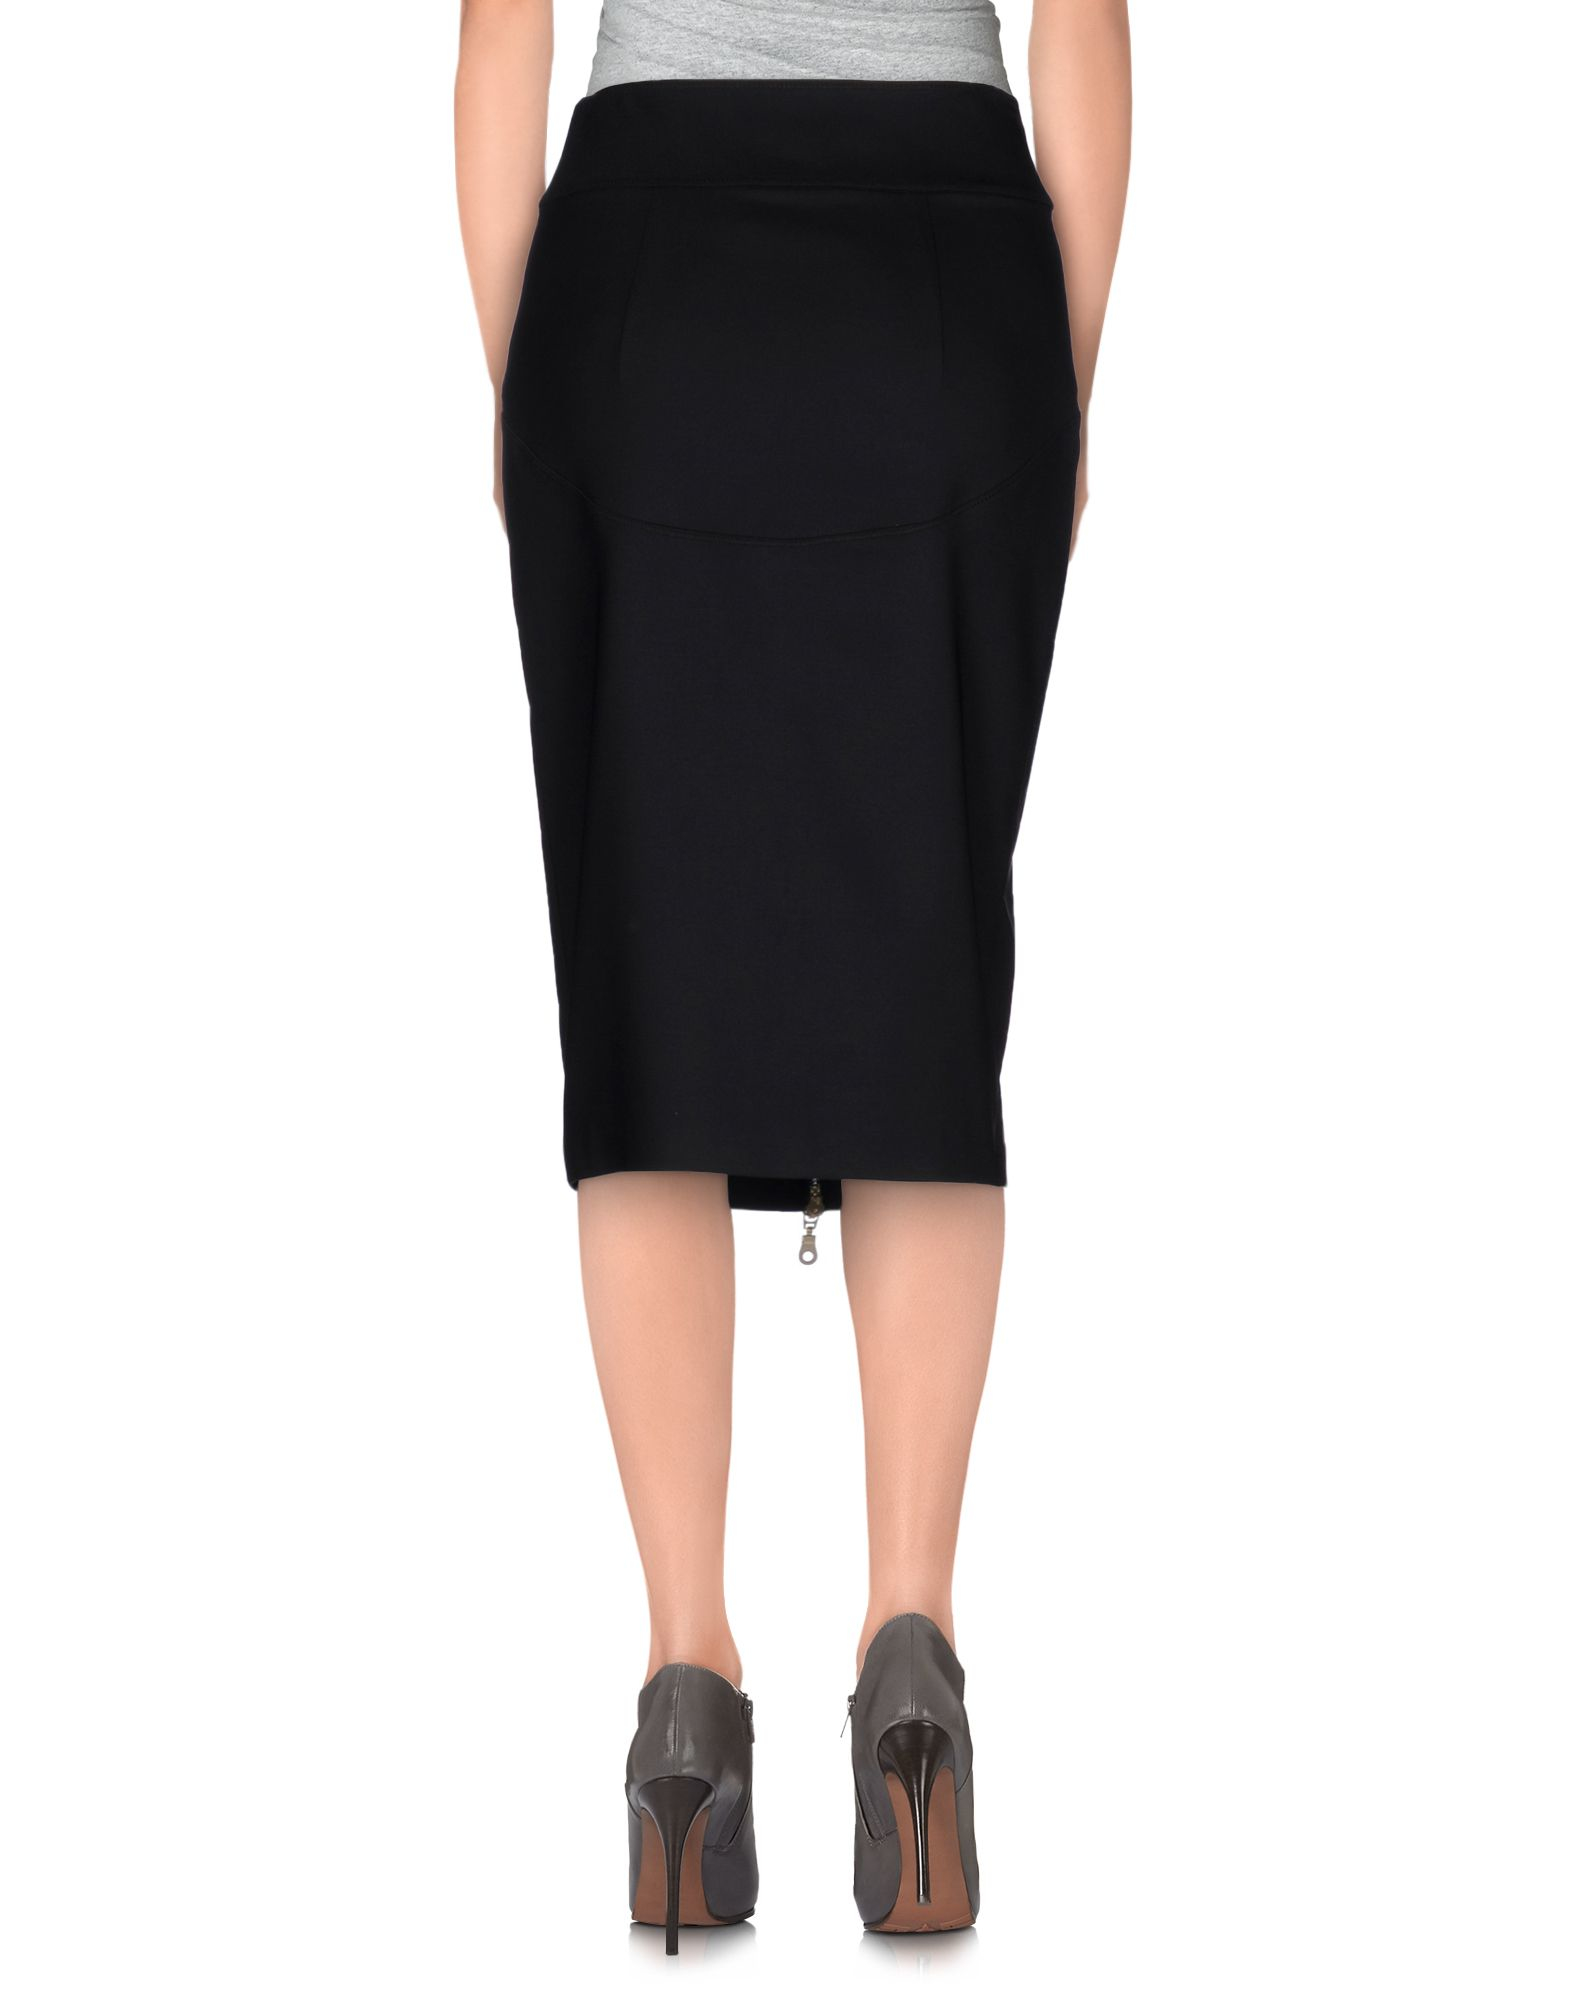 Lyst - French Connection Knee Length Skirt in Black